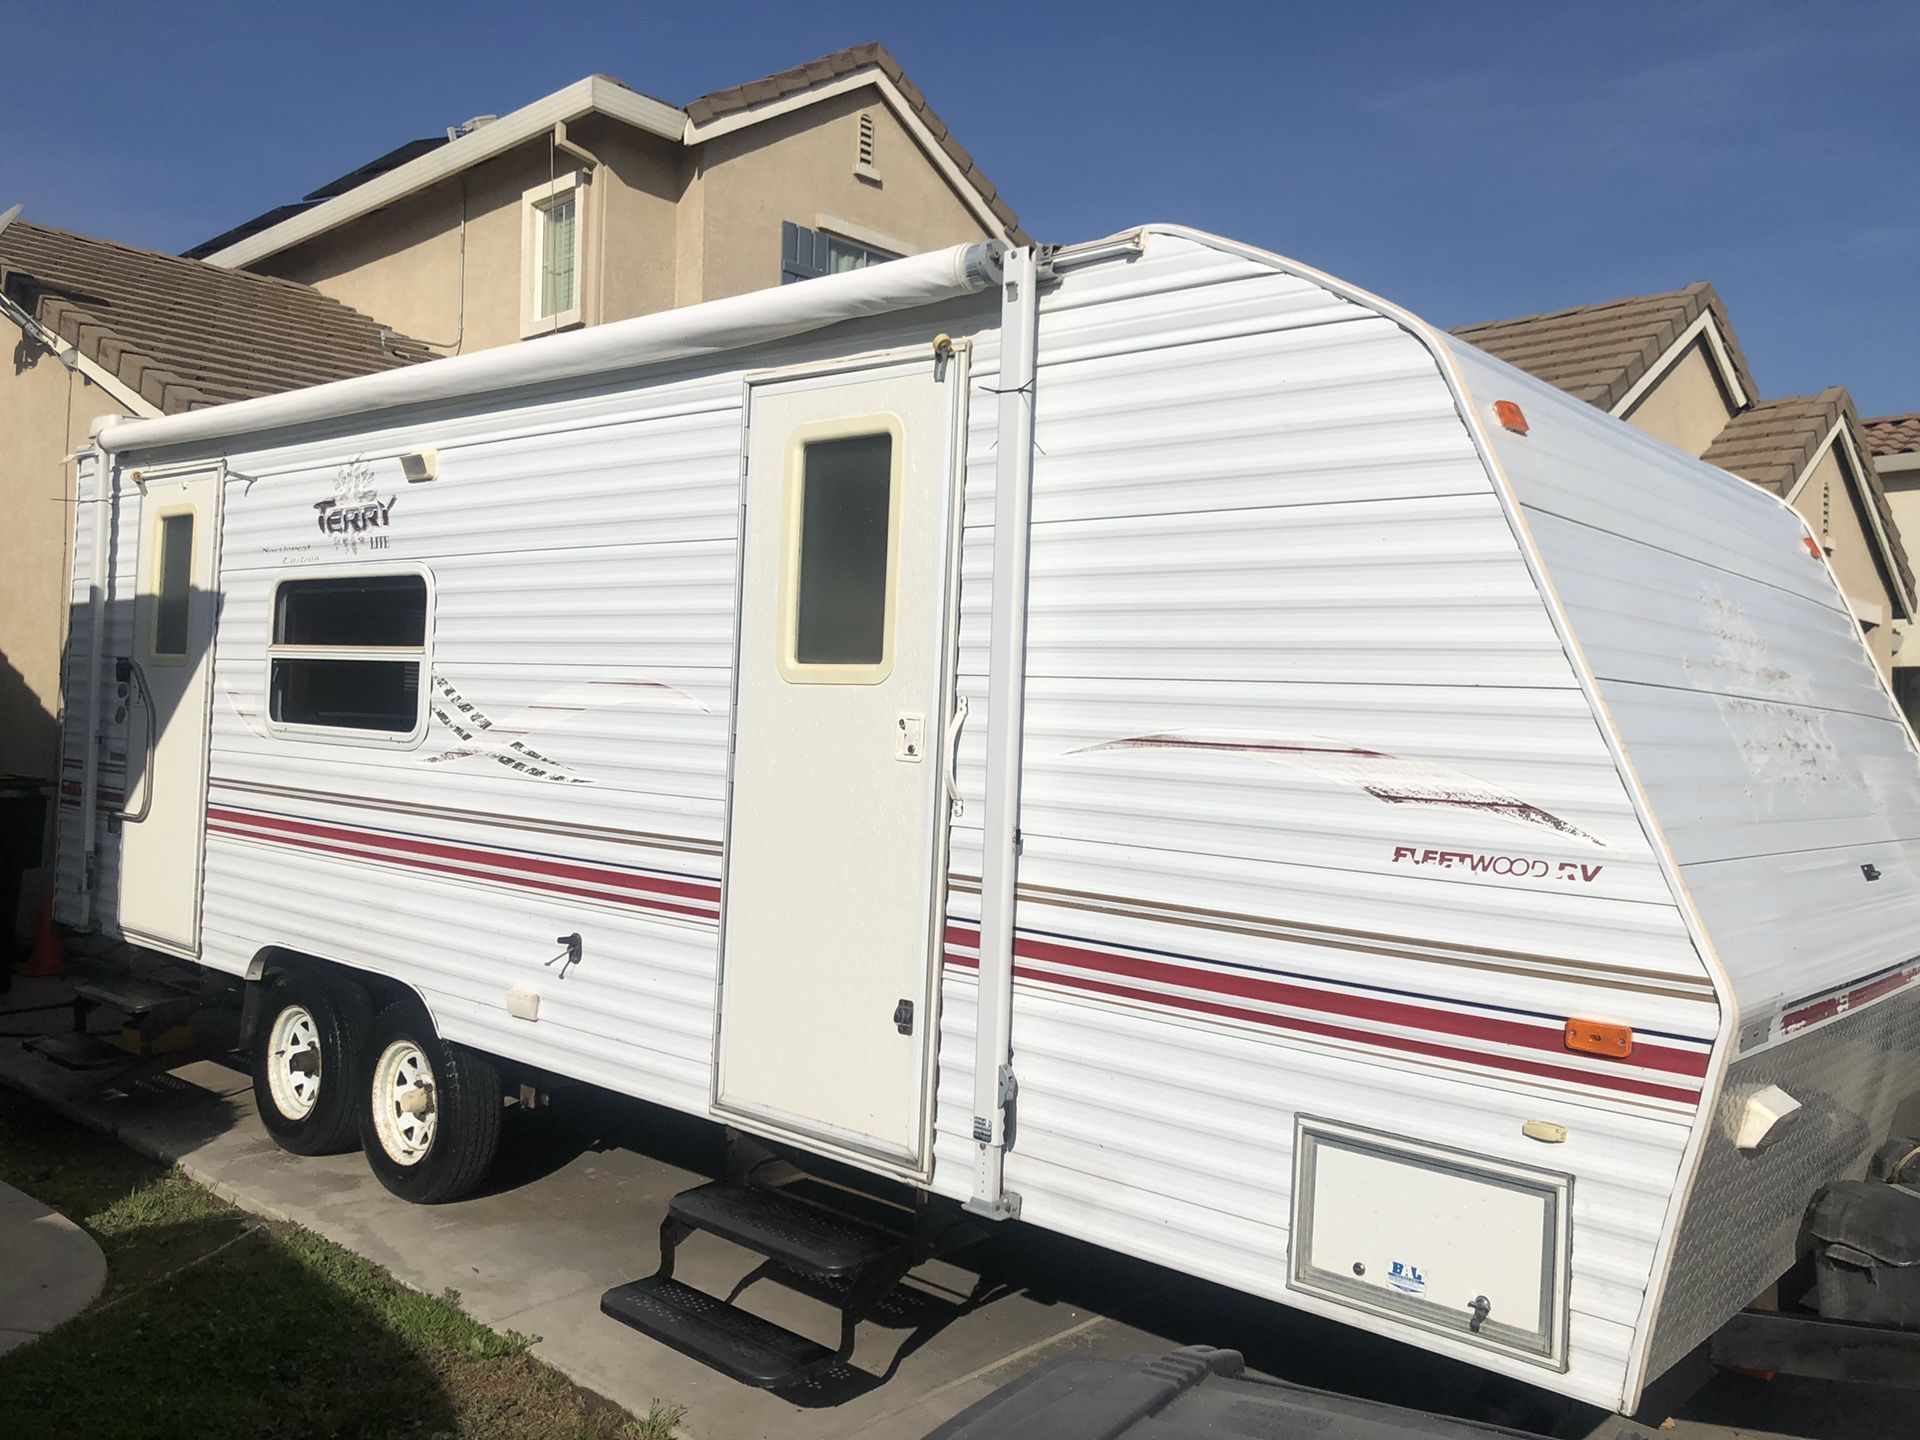 2001 Terry lite 25ft would slide out double door entry very clean in and out